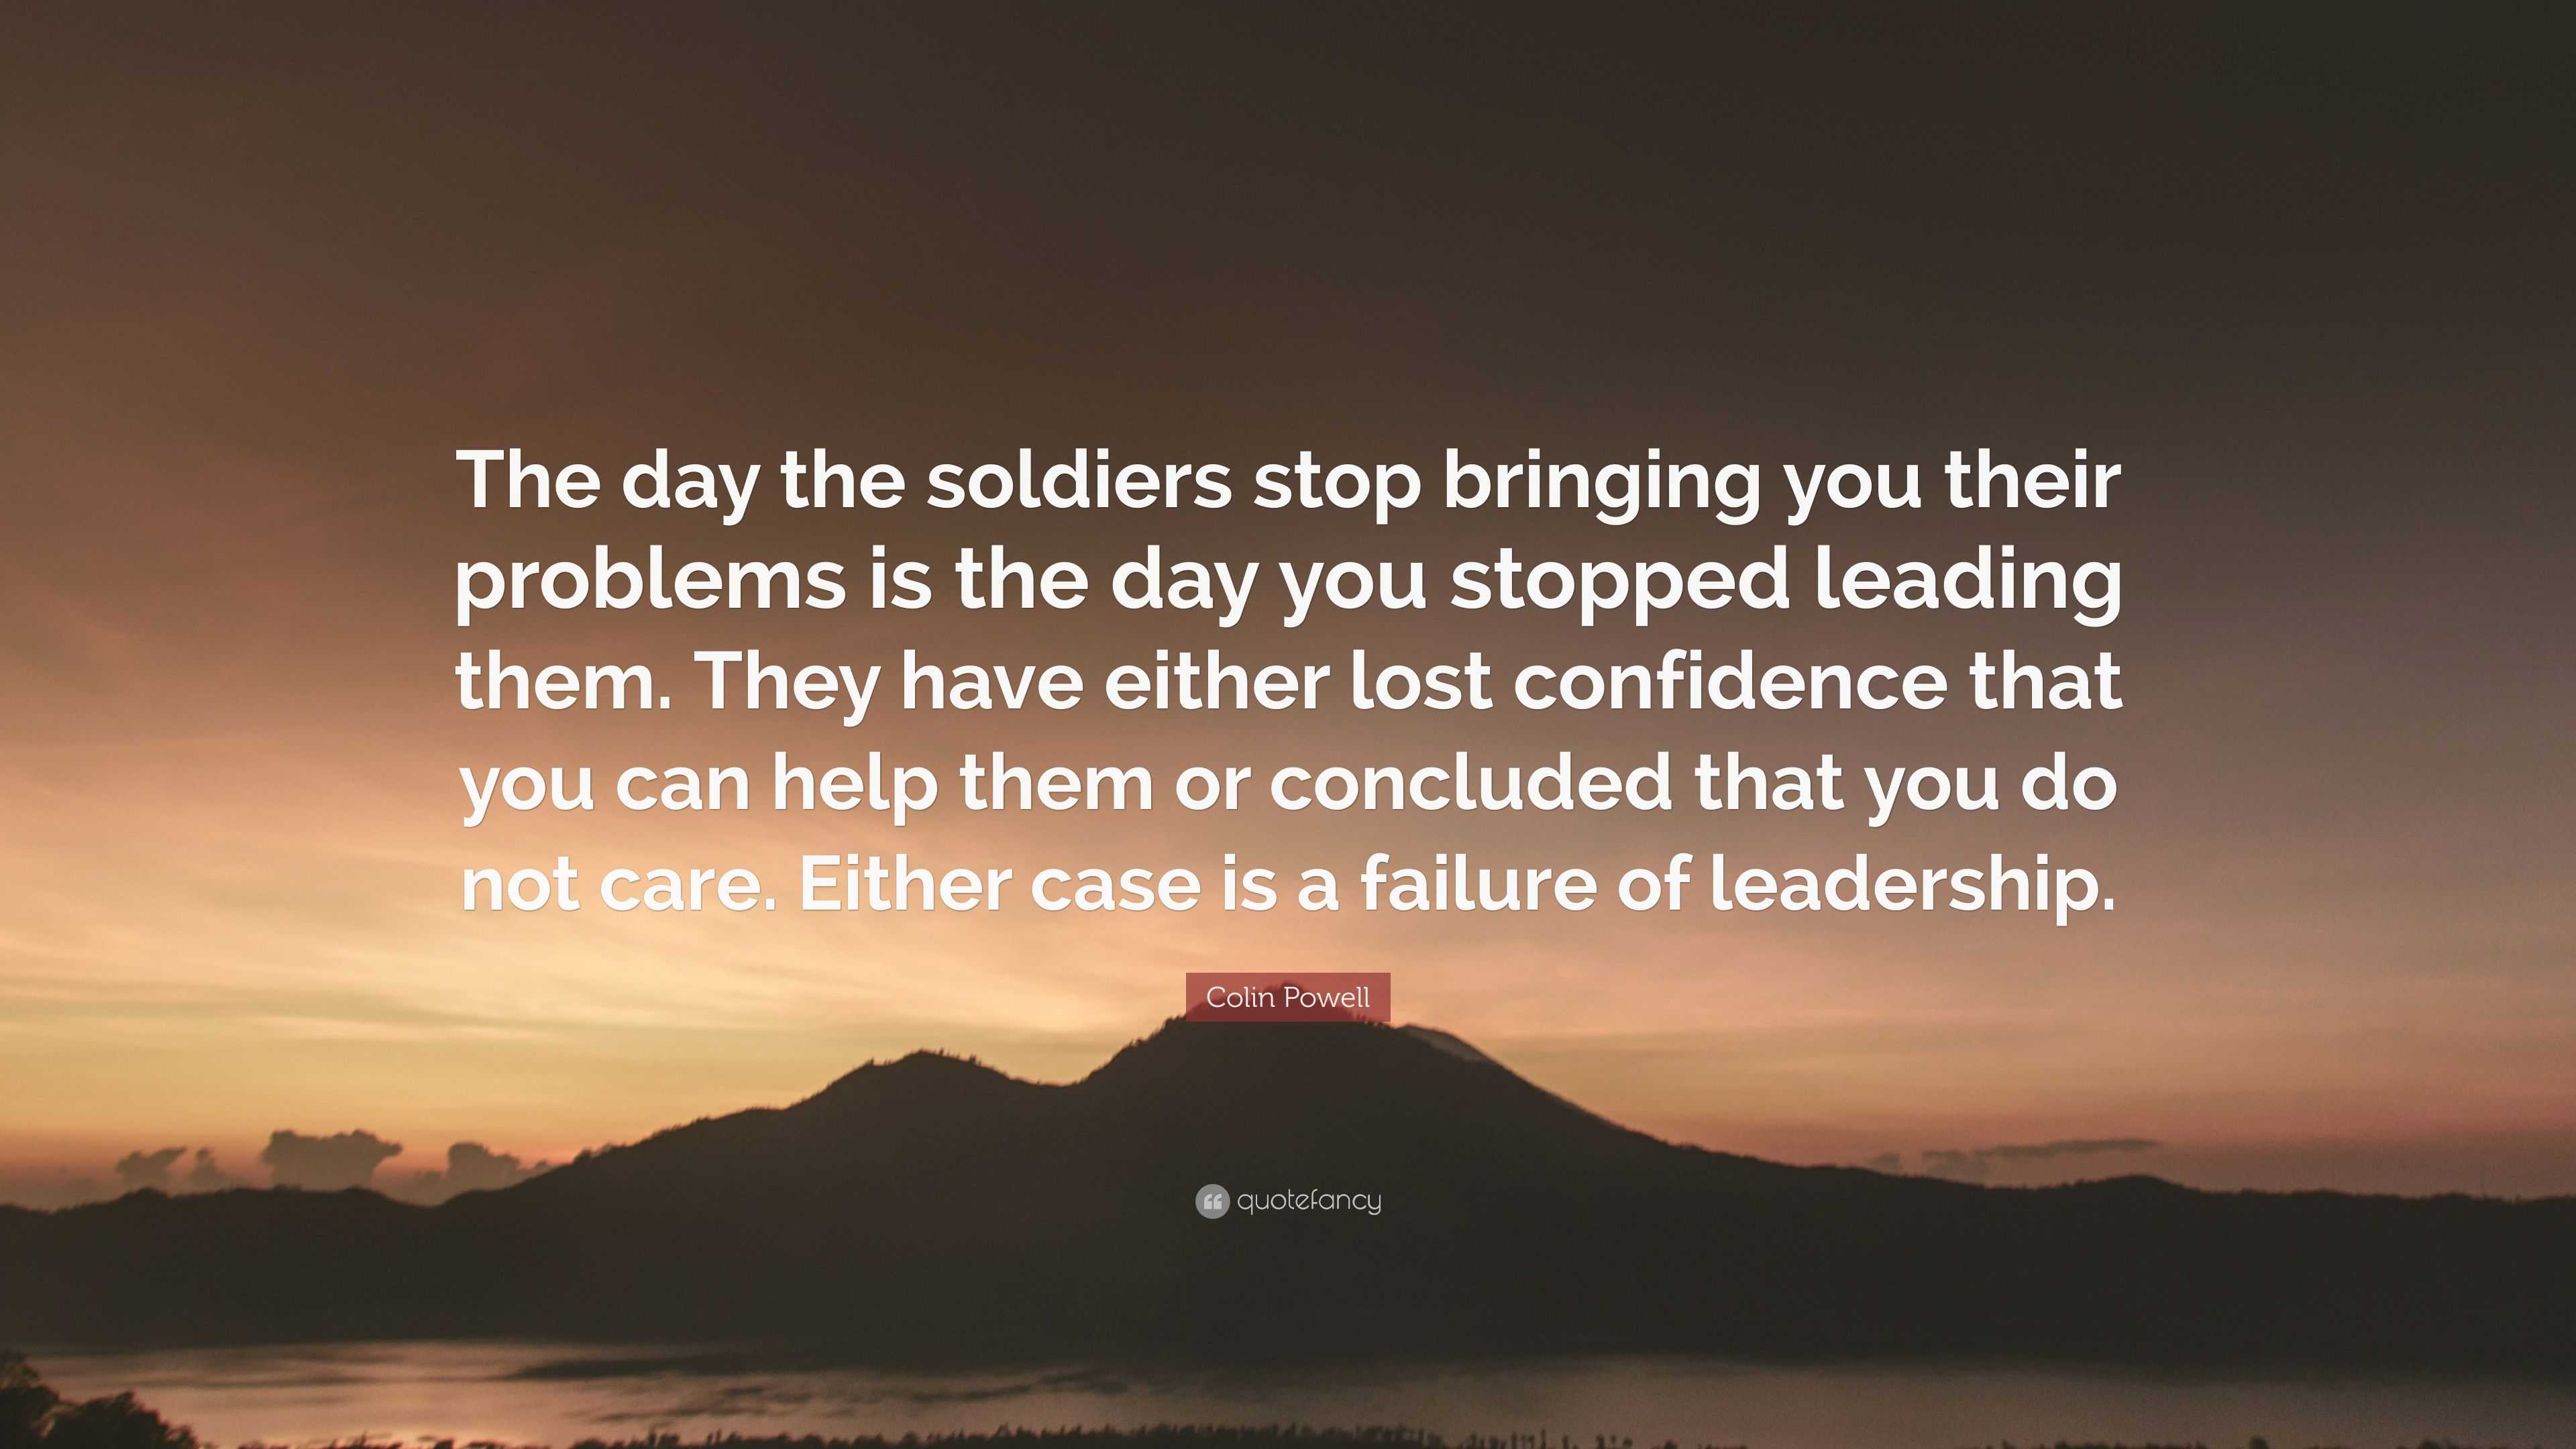 Colin Powell Quote: “The day the soldiers stop bringing you their